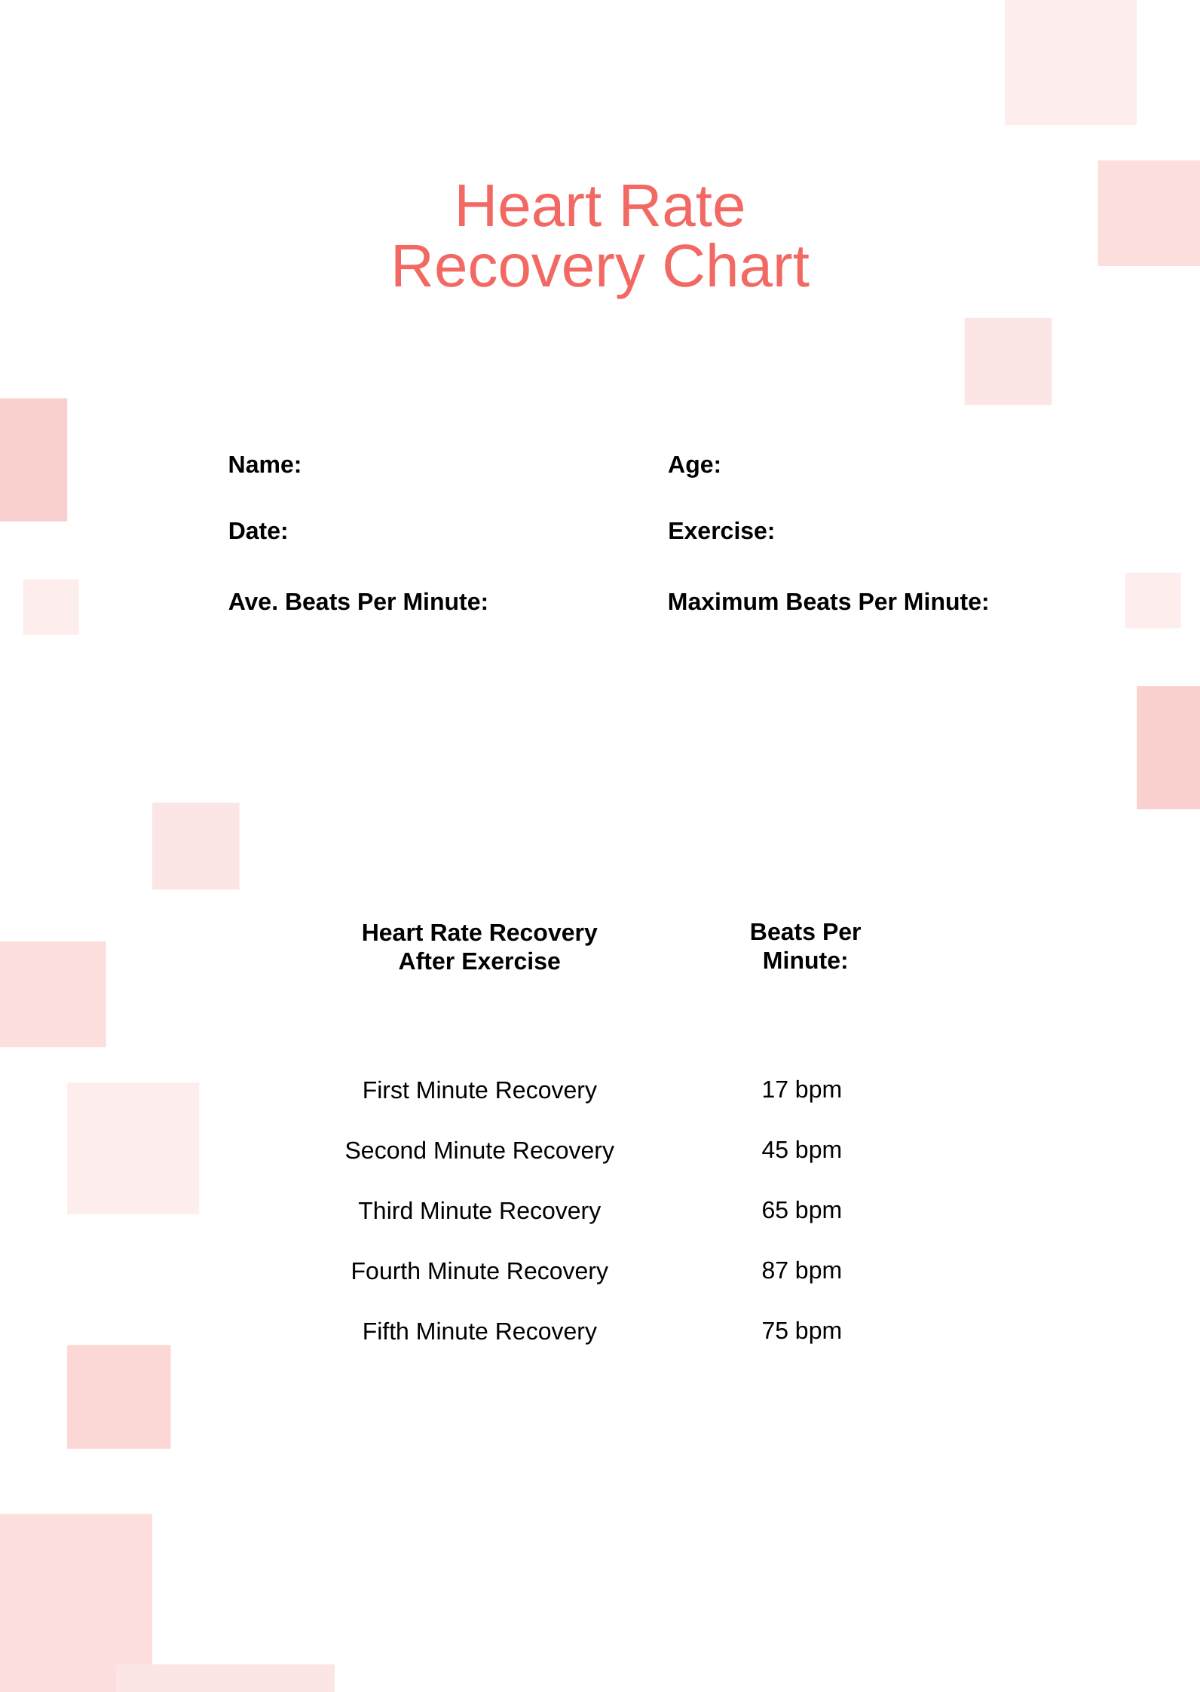 Heart Rate Recovery Chart Template